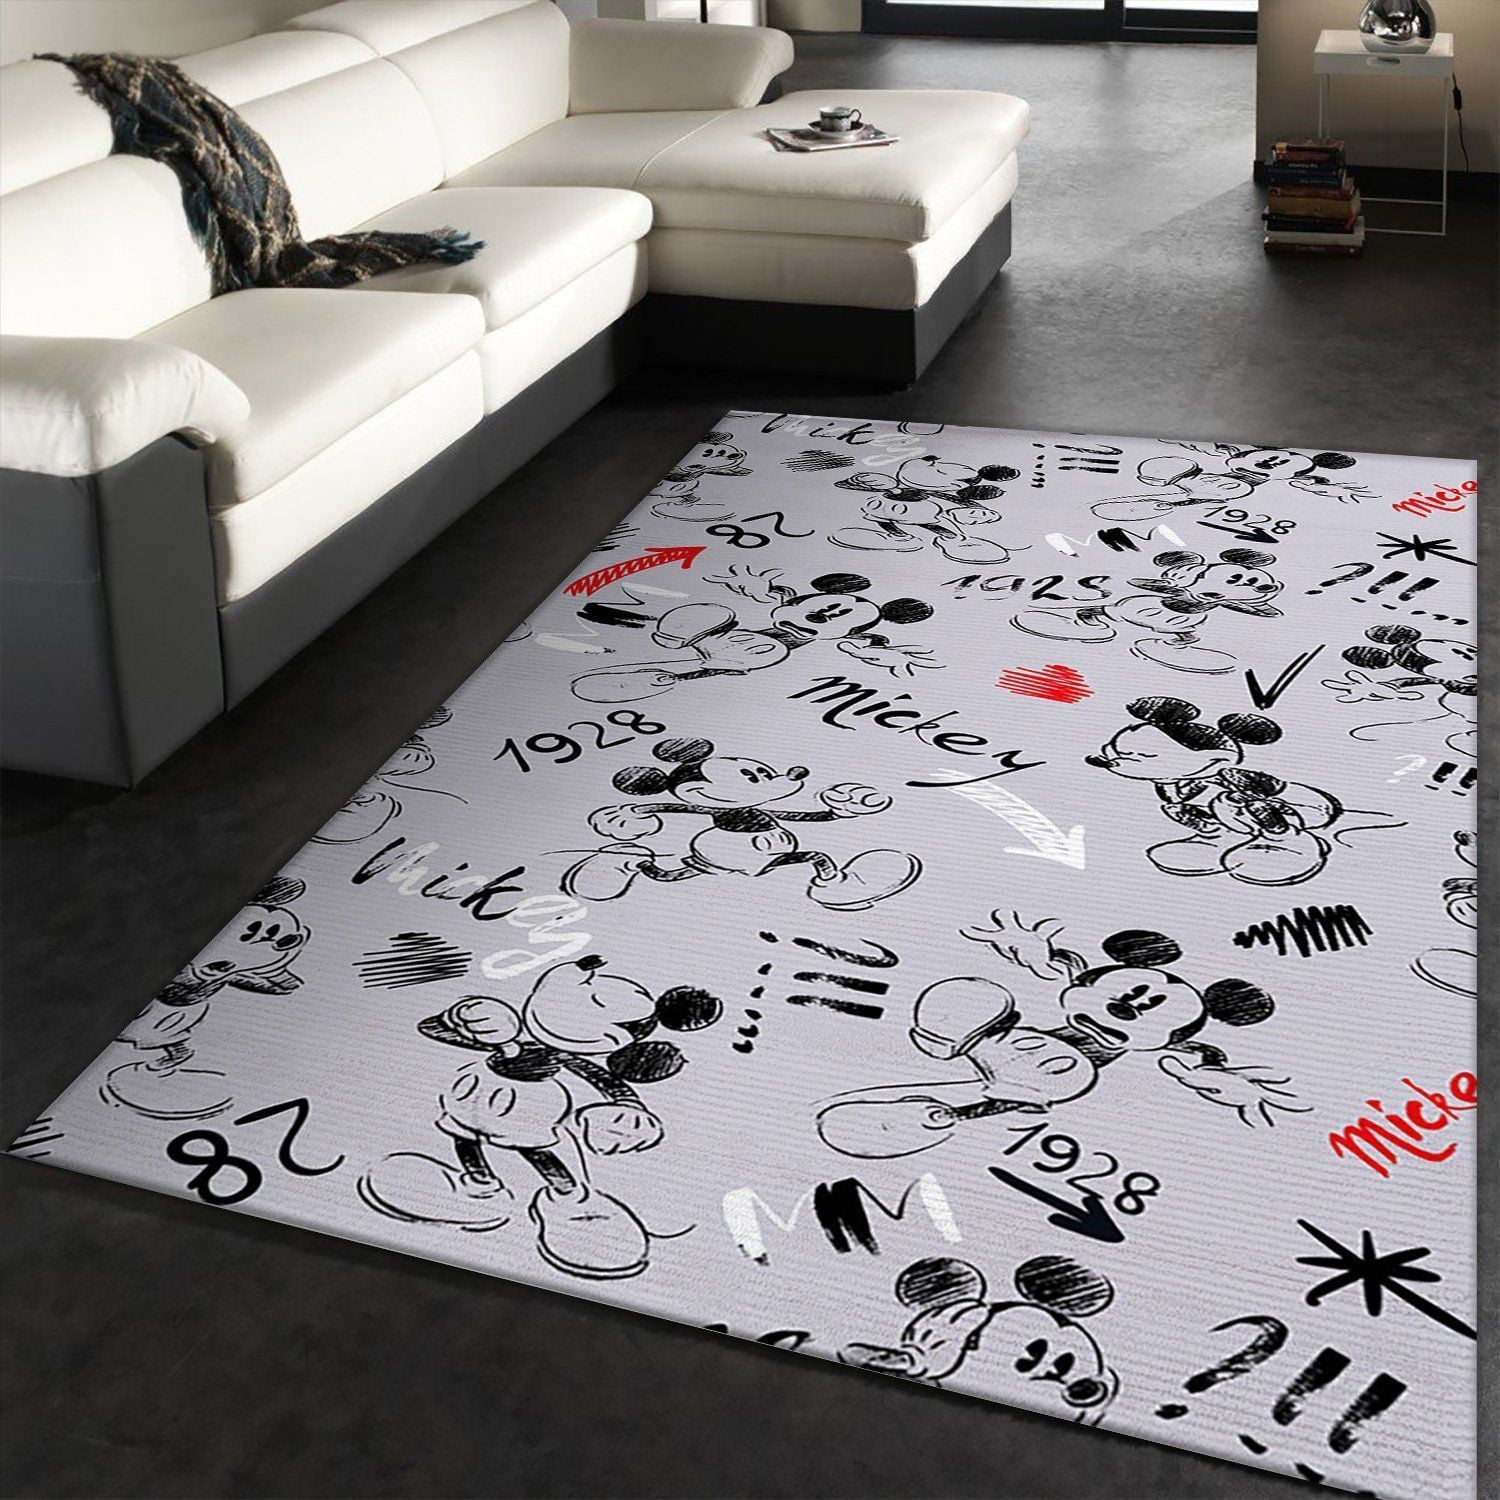 Celebrating 90 Years Of Mickey Mouse Movie Area Rug, Kitchen Rug, Home Decor - Indoor Outdoor Rugs